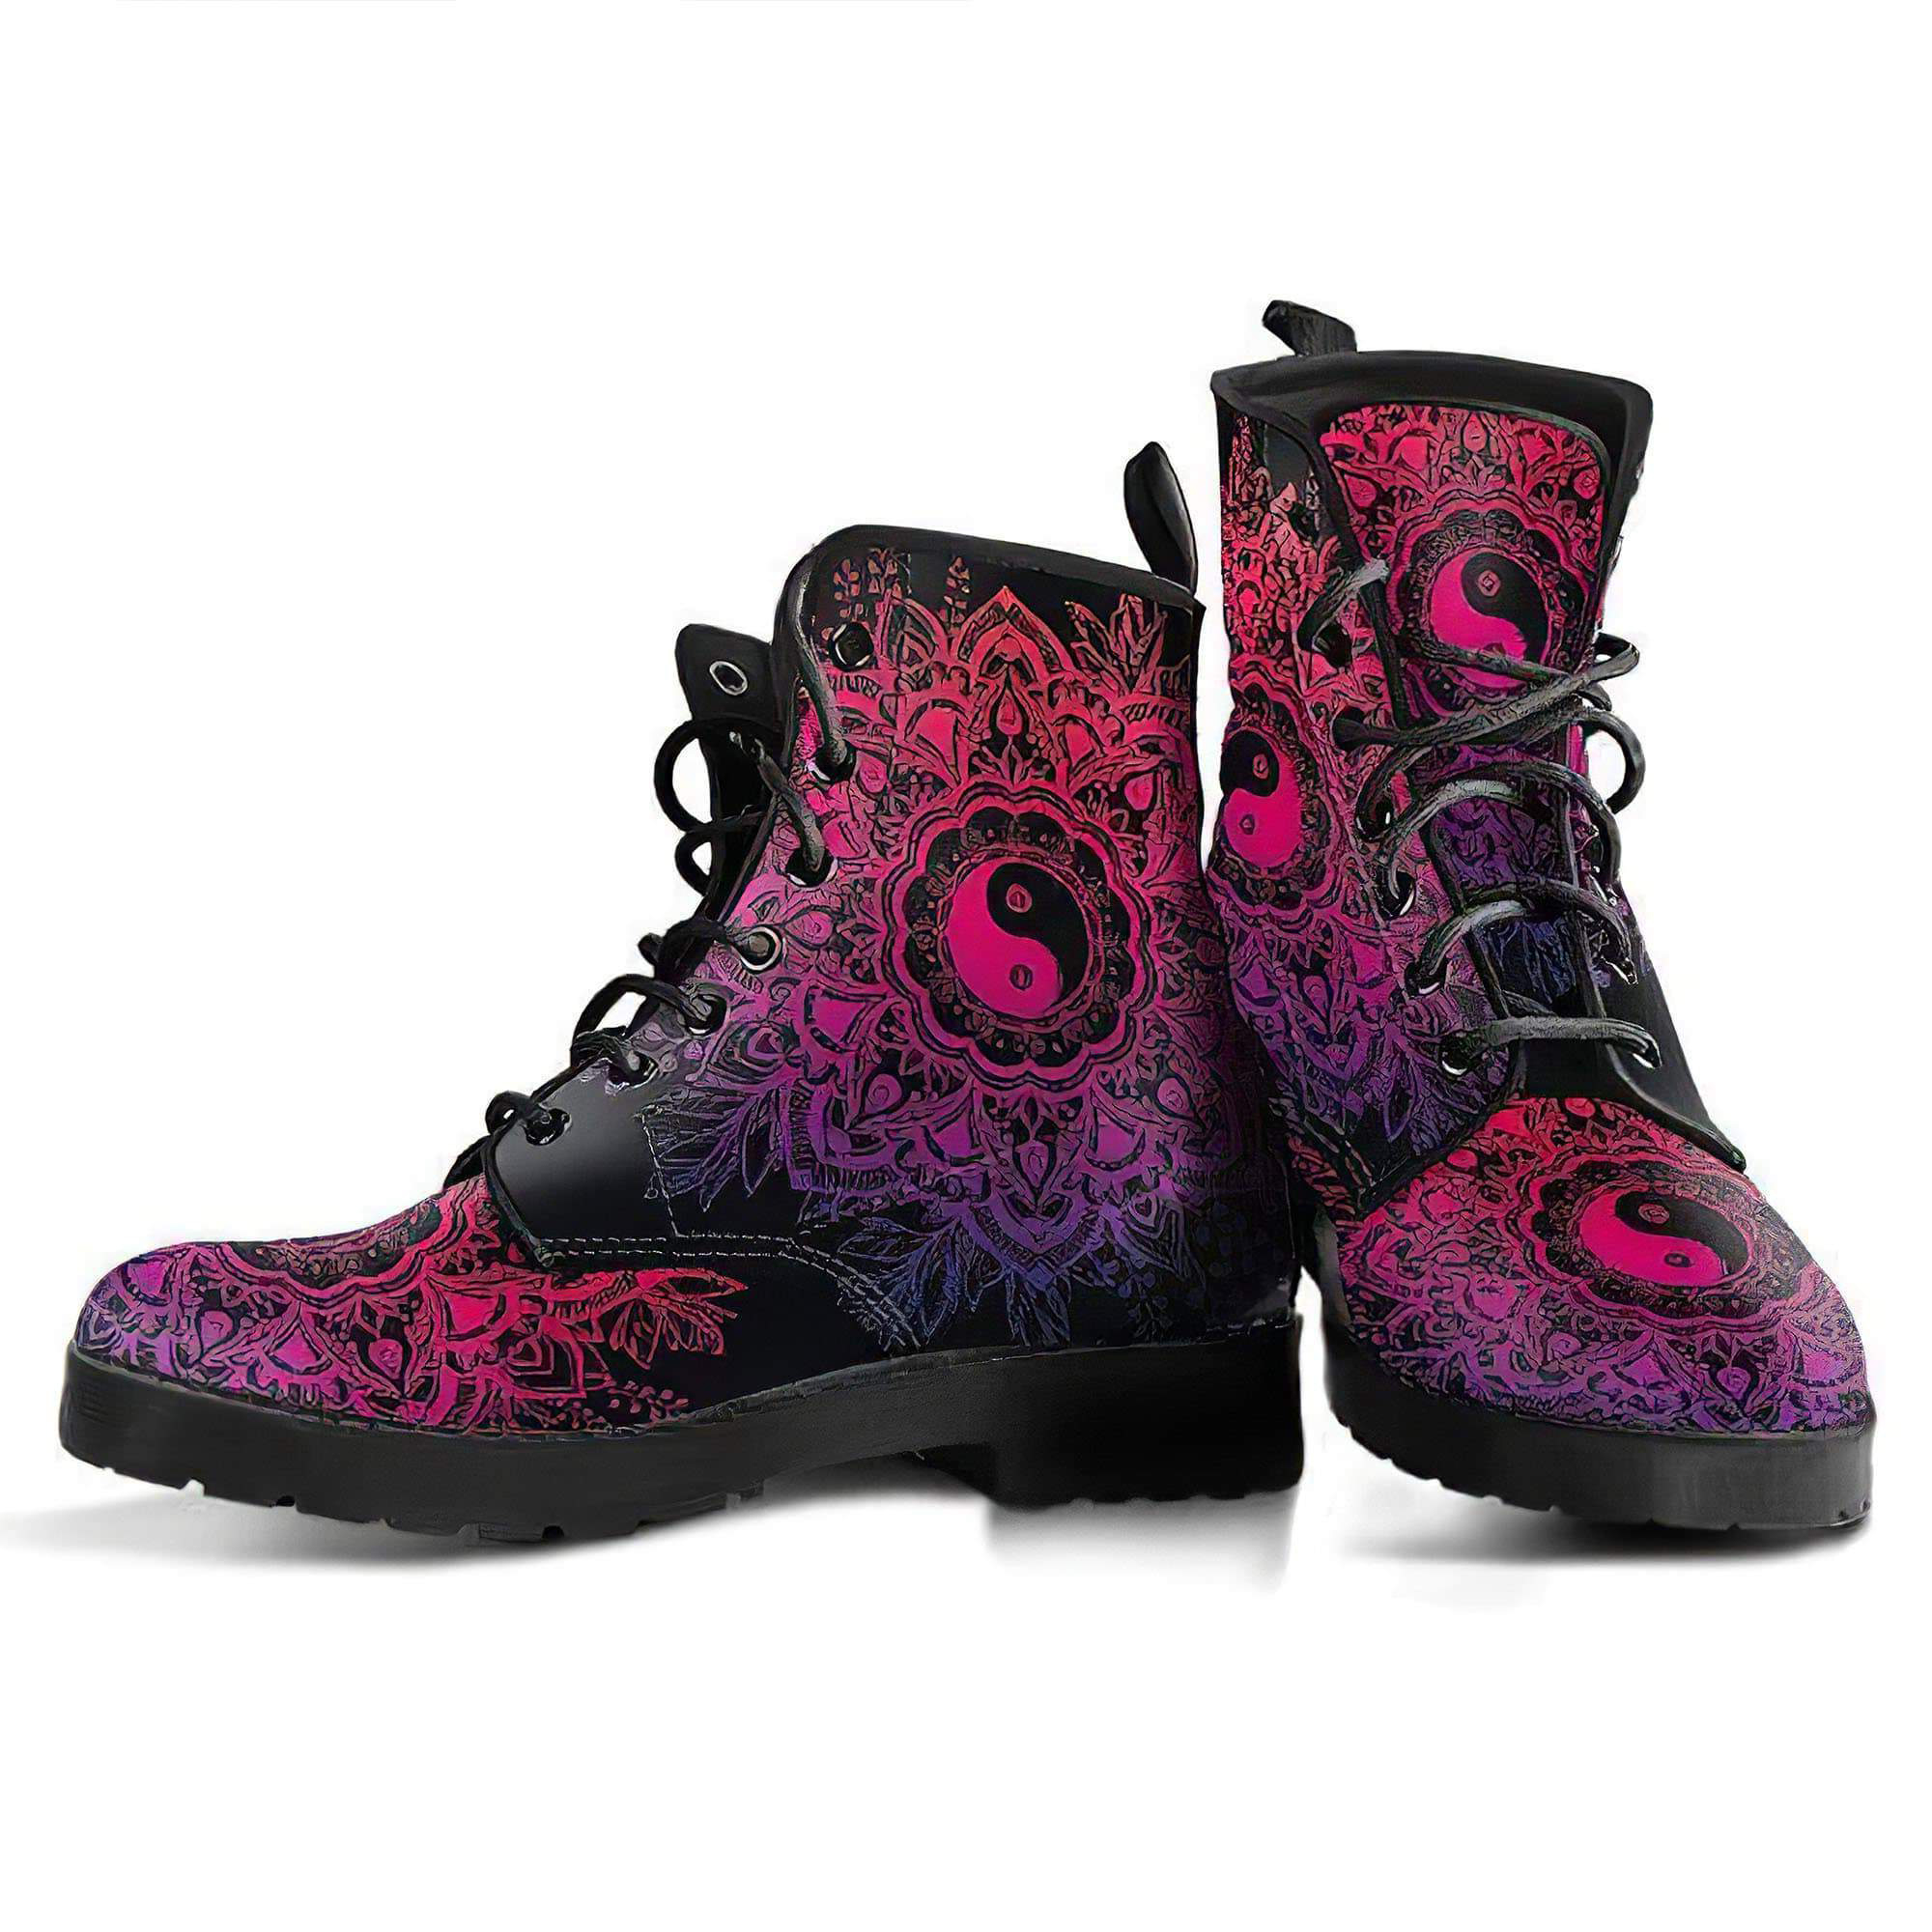 yinyang-mandala-2-handcrafted-boots-women-s-leather-boots-12051982090301.jpg